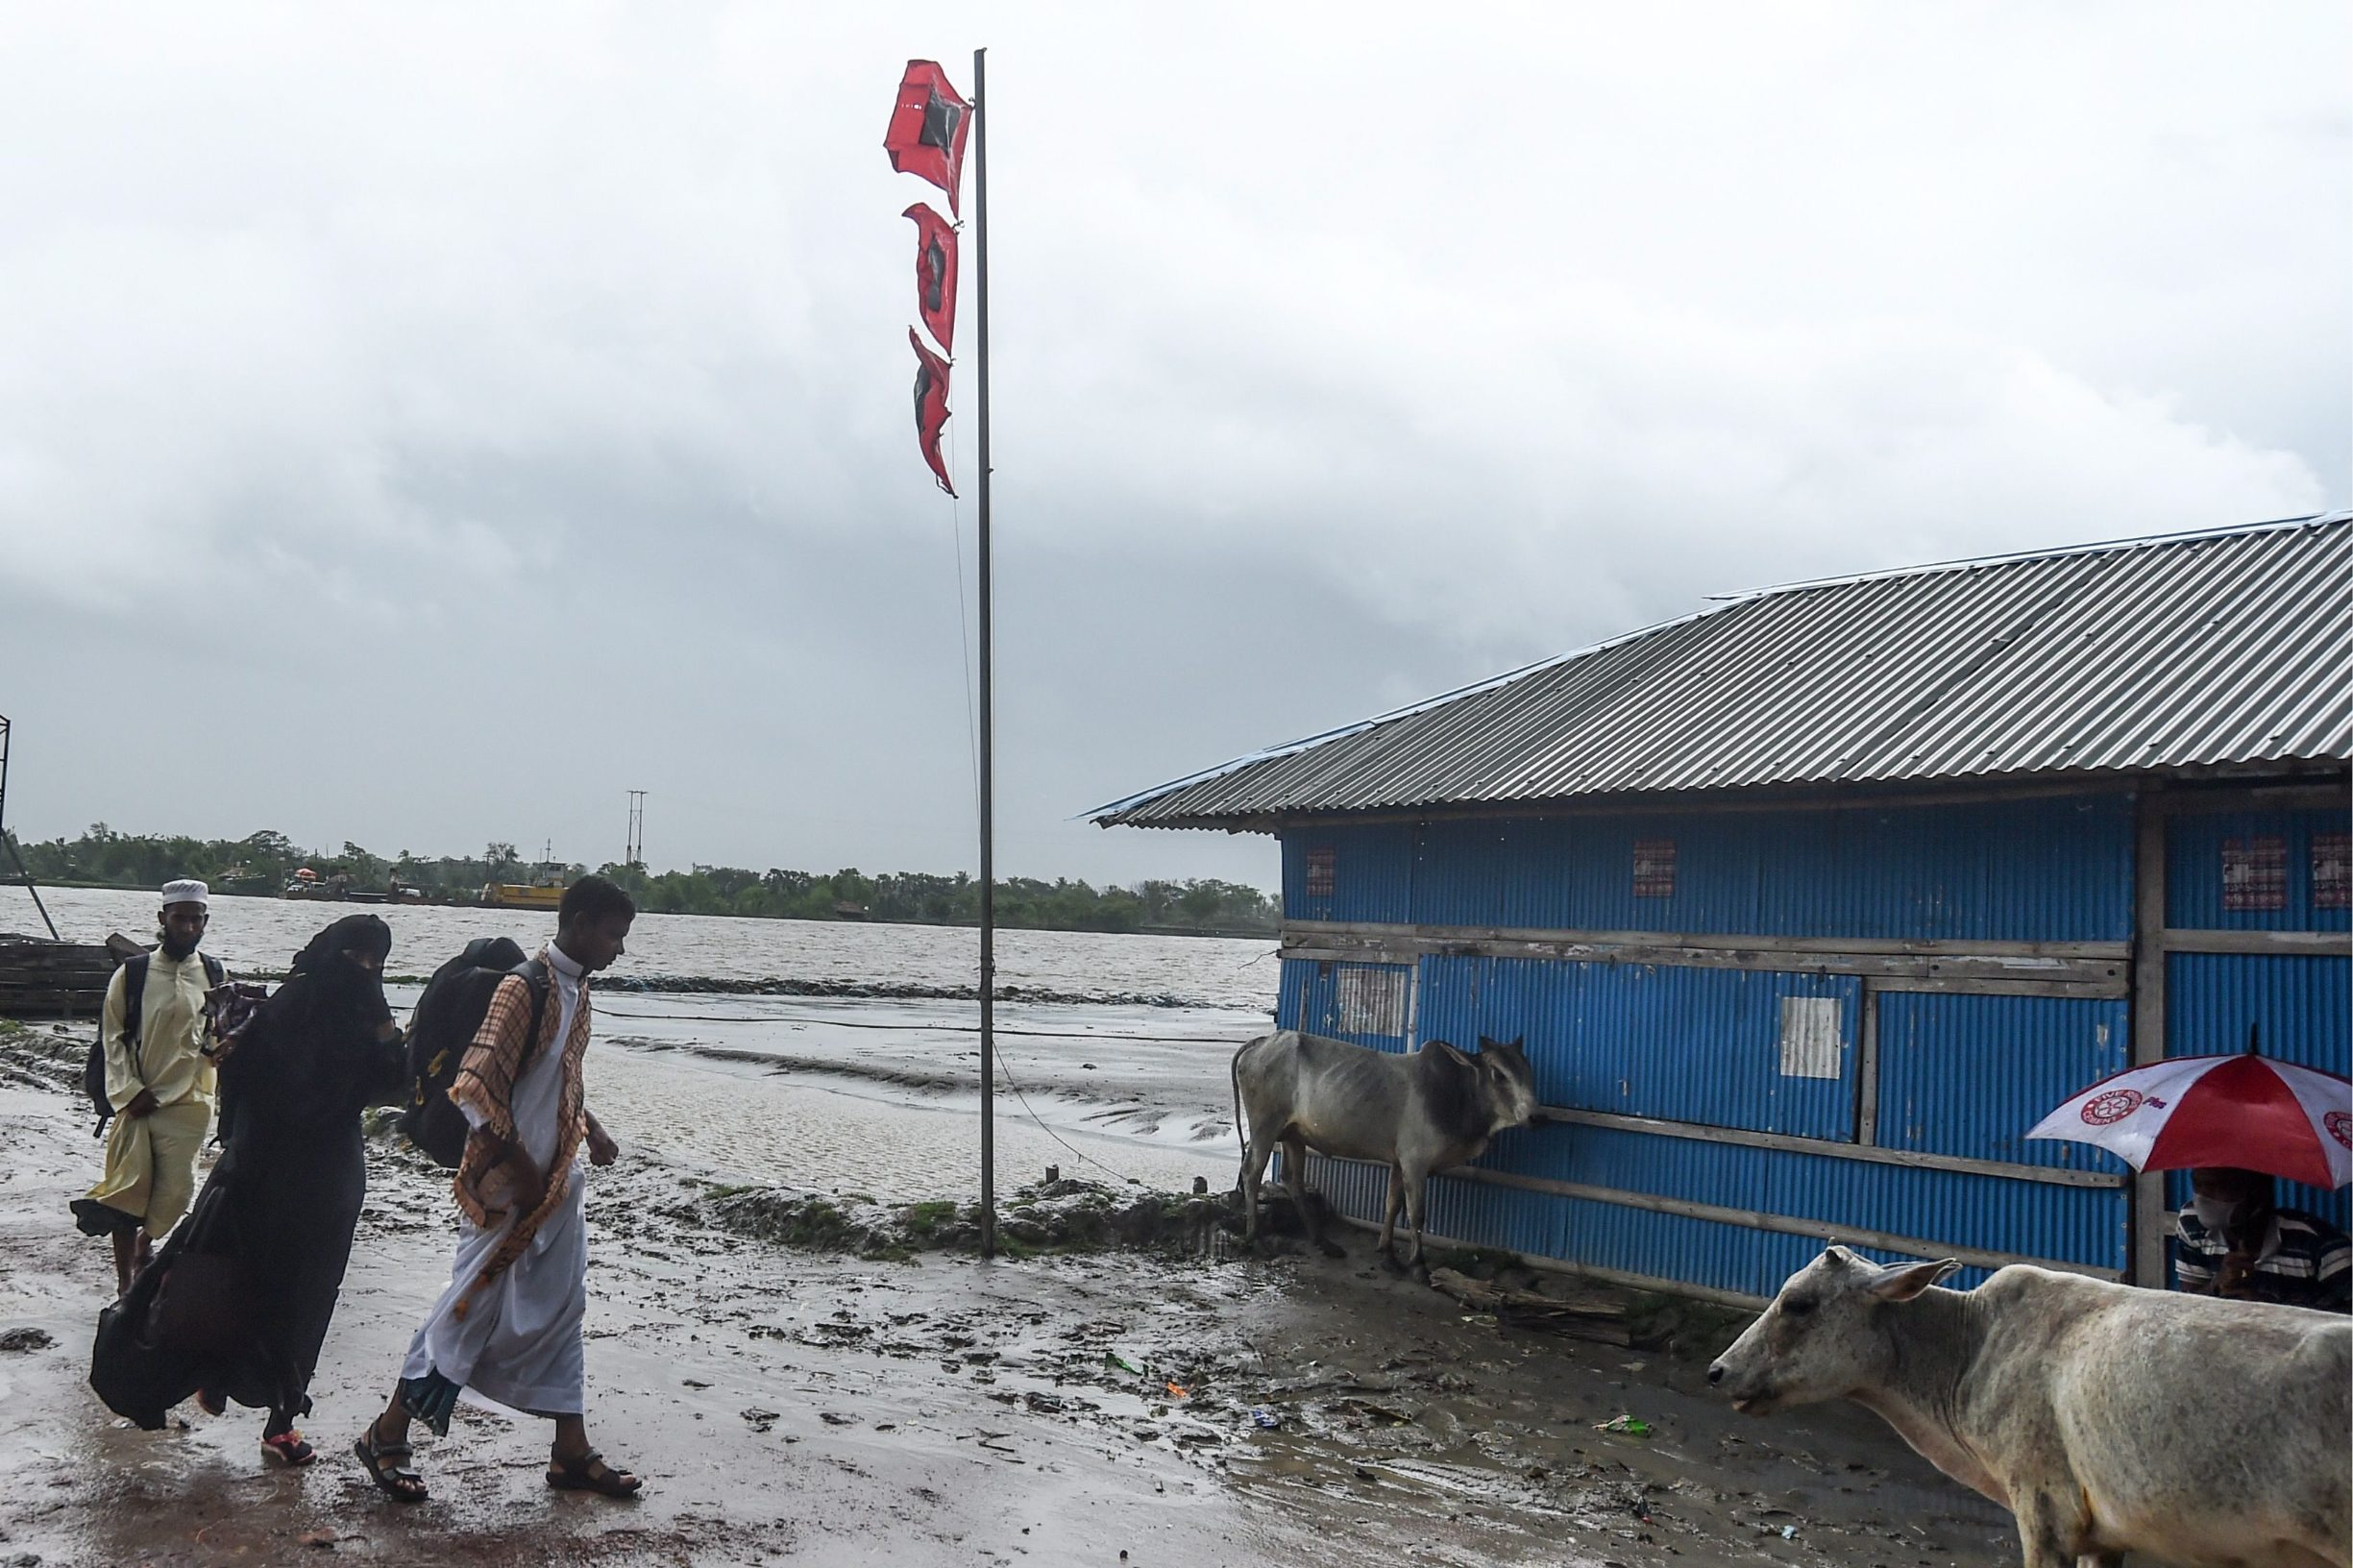 Residents walk past a great danger signal 10 flag (C) ahead of the expected landfall of cyclone Amphan, in Dacope of Khulna district on May 20, 2020. - Several million people were taking shelter and praying for the best on Wednesday as the Bay of Bengal's fiercest cyclone in decades roared towards Bangladesh and eastern India, with forecasts of a potentially devastating and deadly storm surge. Authorities have scrambled to evacuate low lying areas in the path of Amphan, which is only the second 